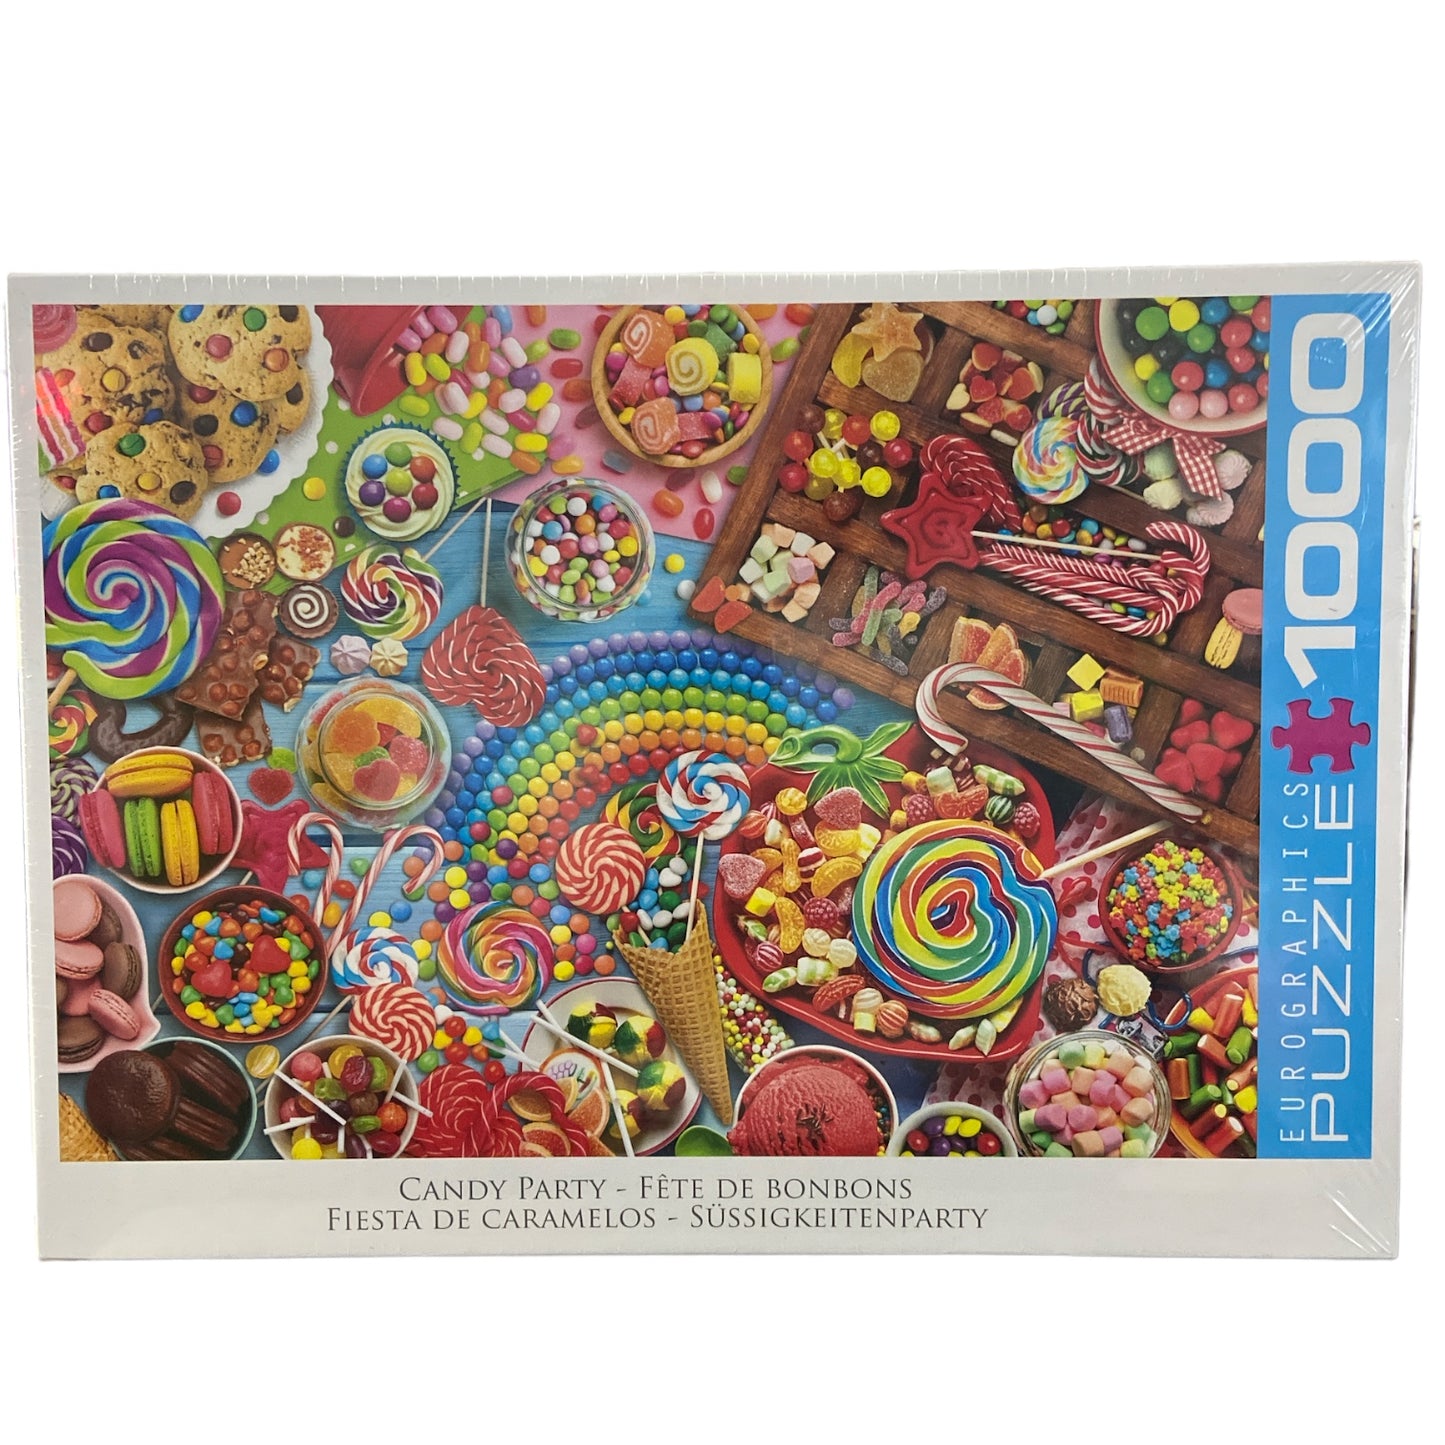 Eurographics 1000pc Candy Party Puzzle